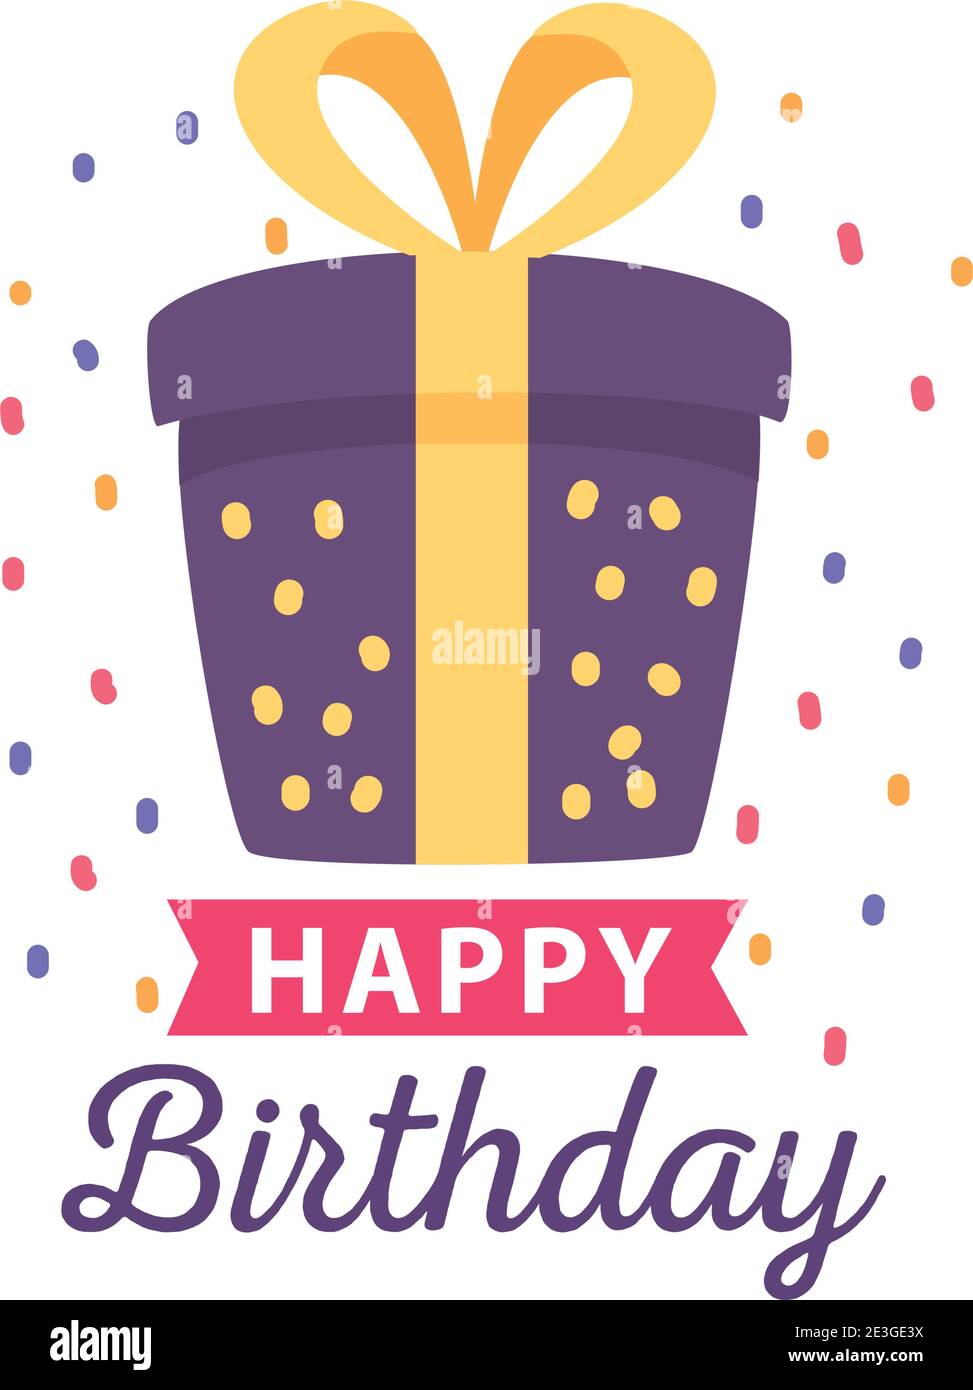 happy birthday badge with gift box and confetti decoration vector illustration design Stock Vector